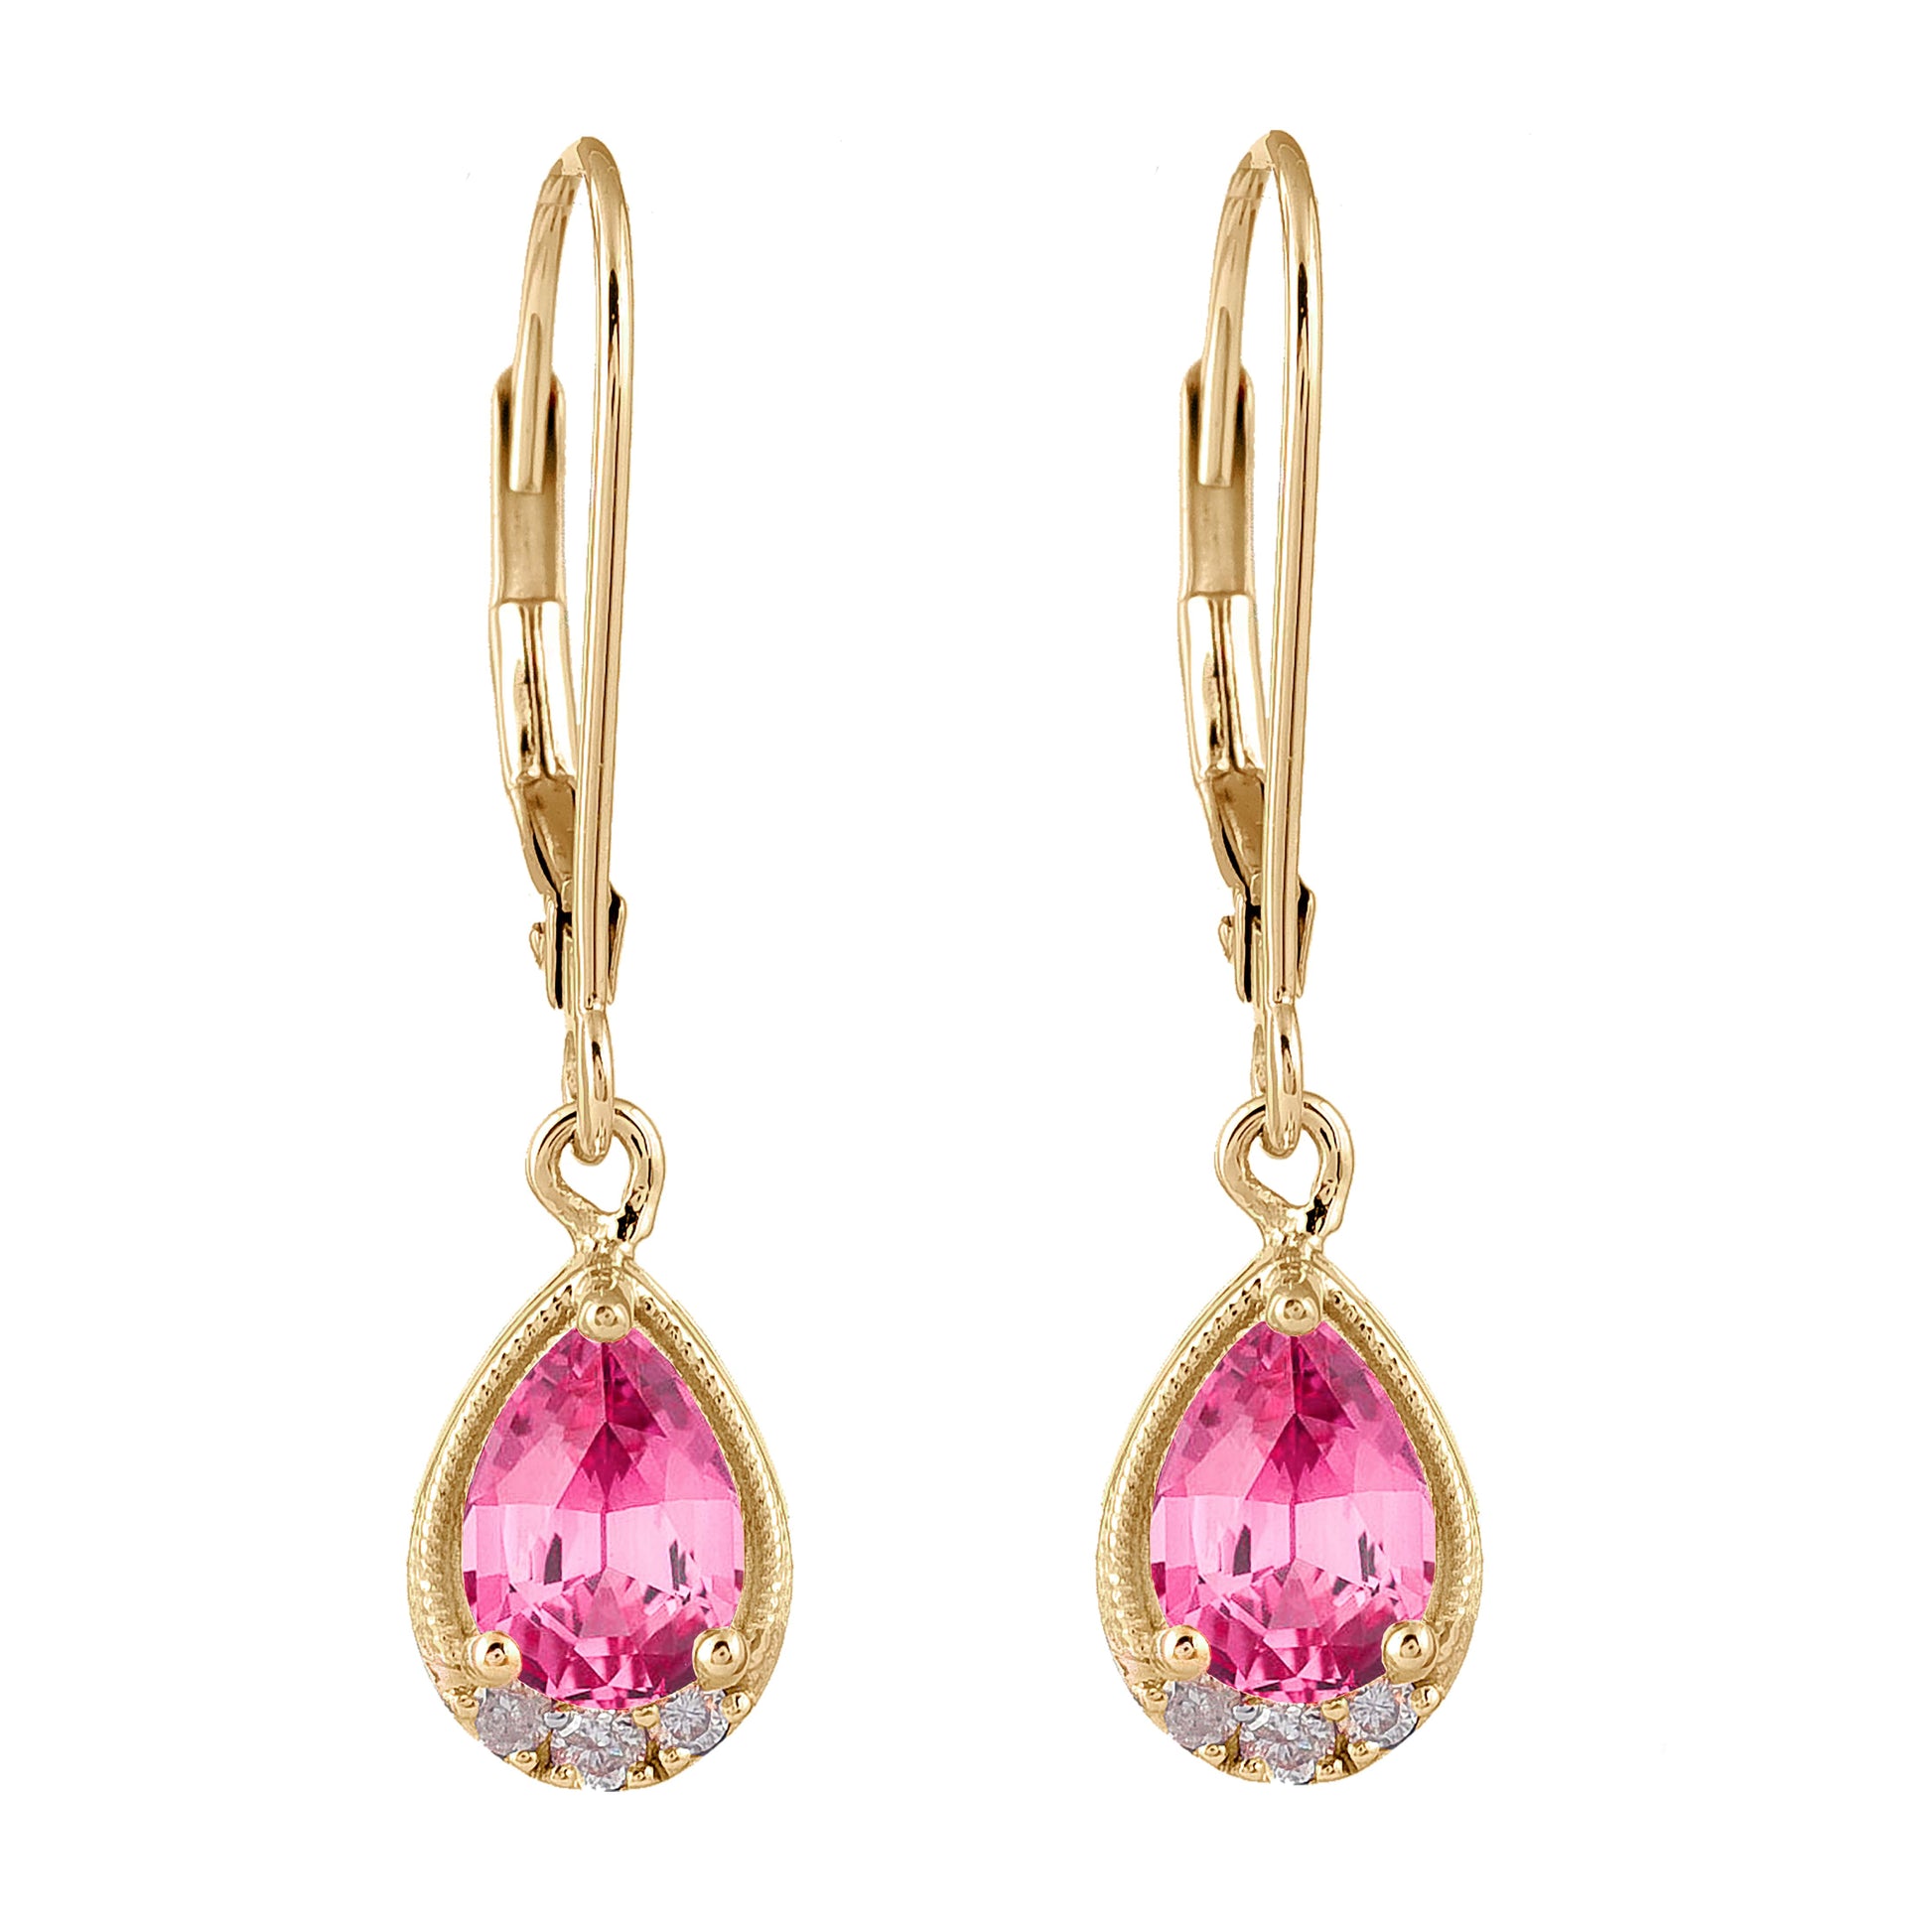 Shimmering Pink Tourmaline and Diamond Earrings